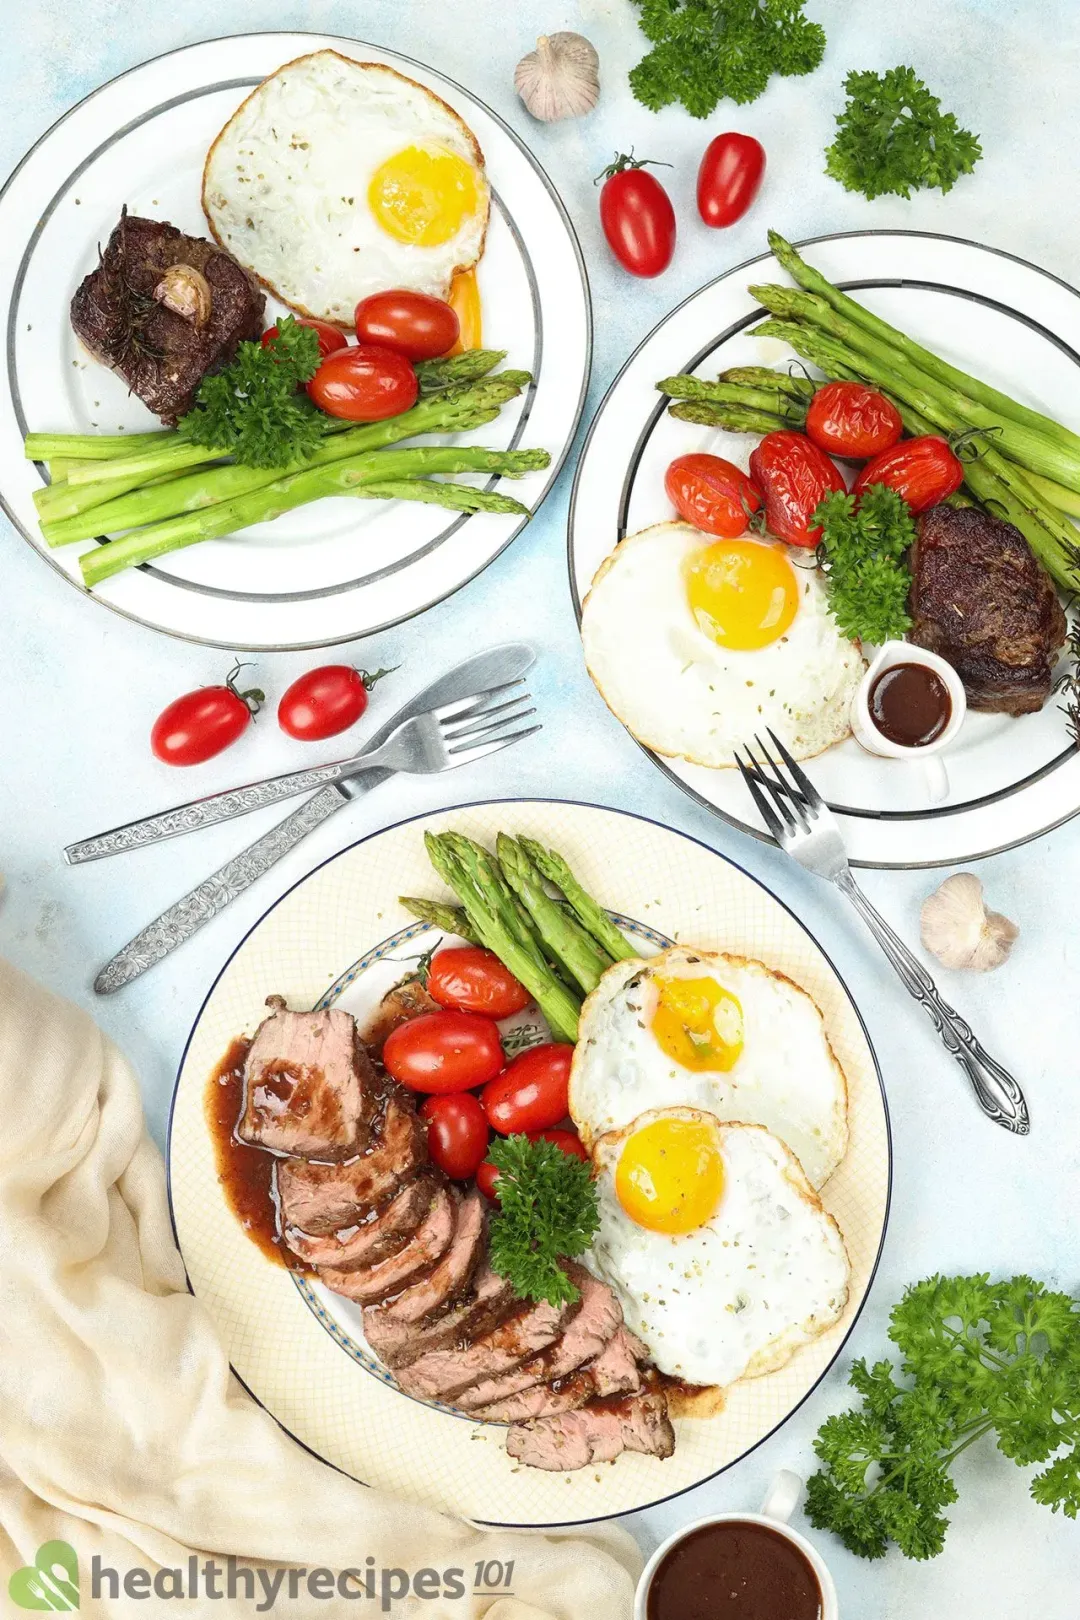 What to Serve With Steak and Eggs